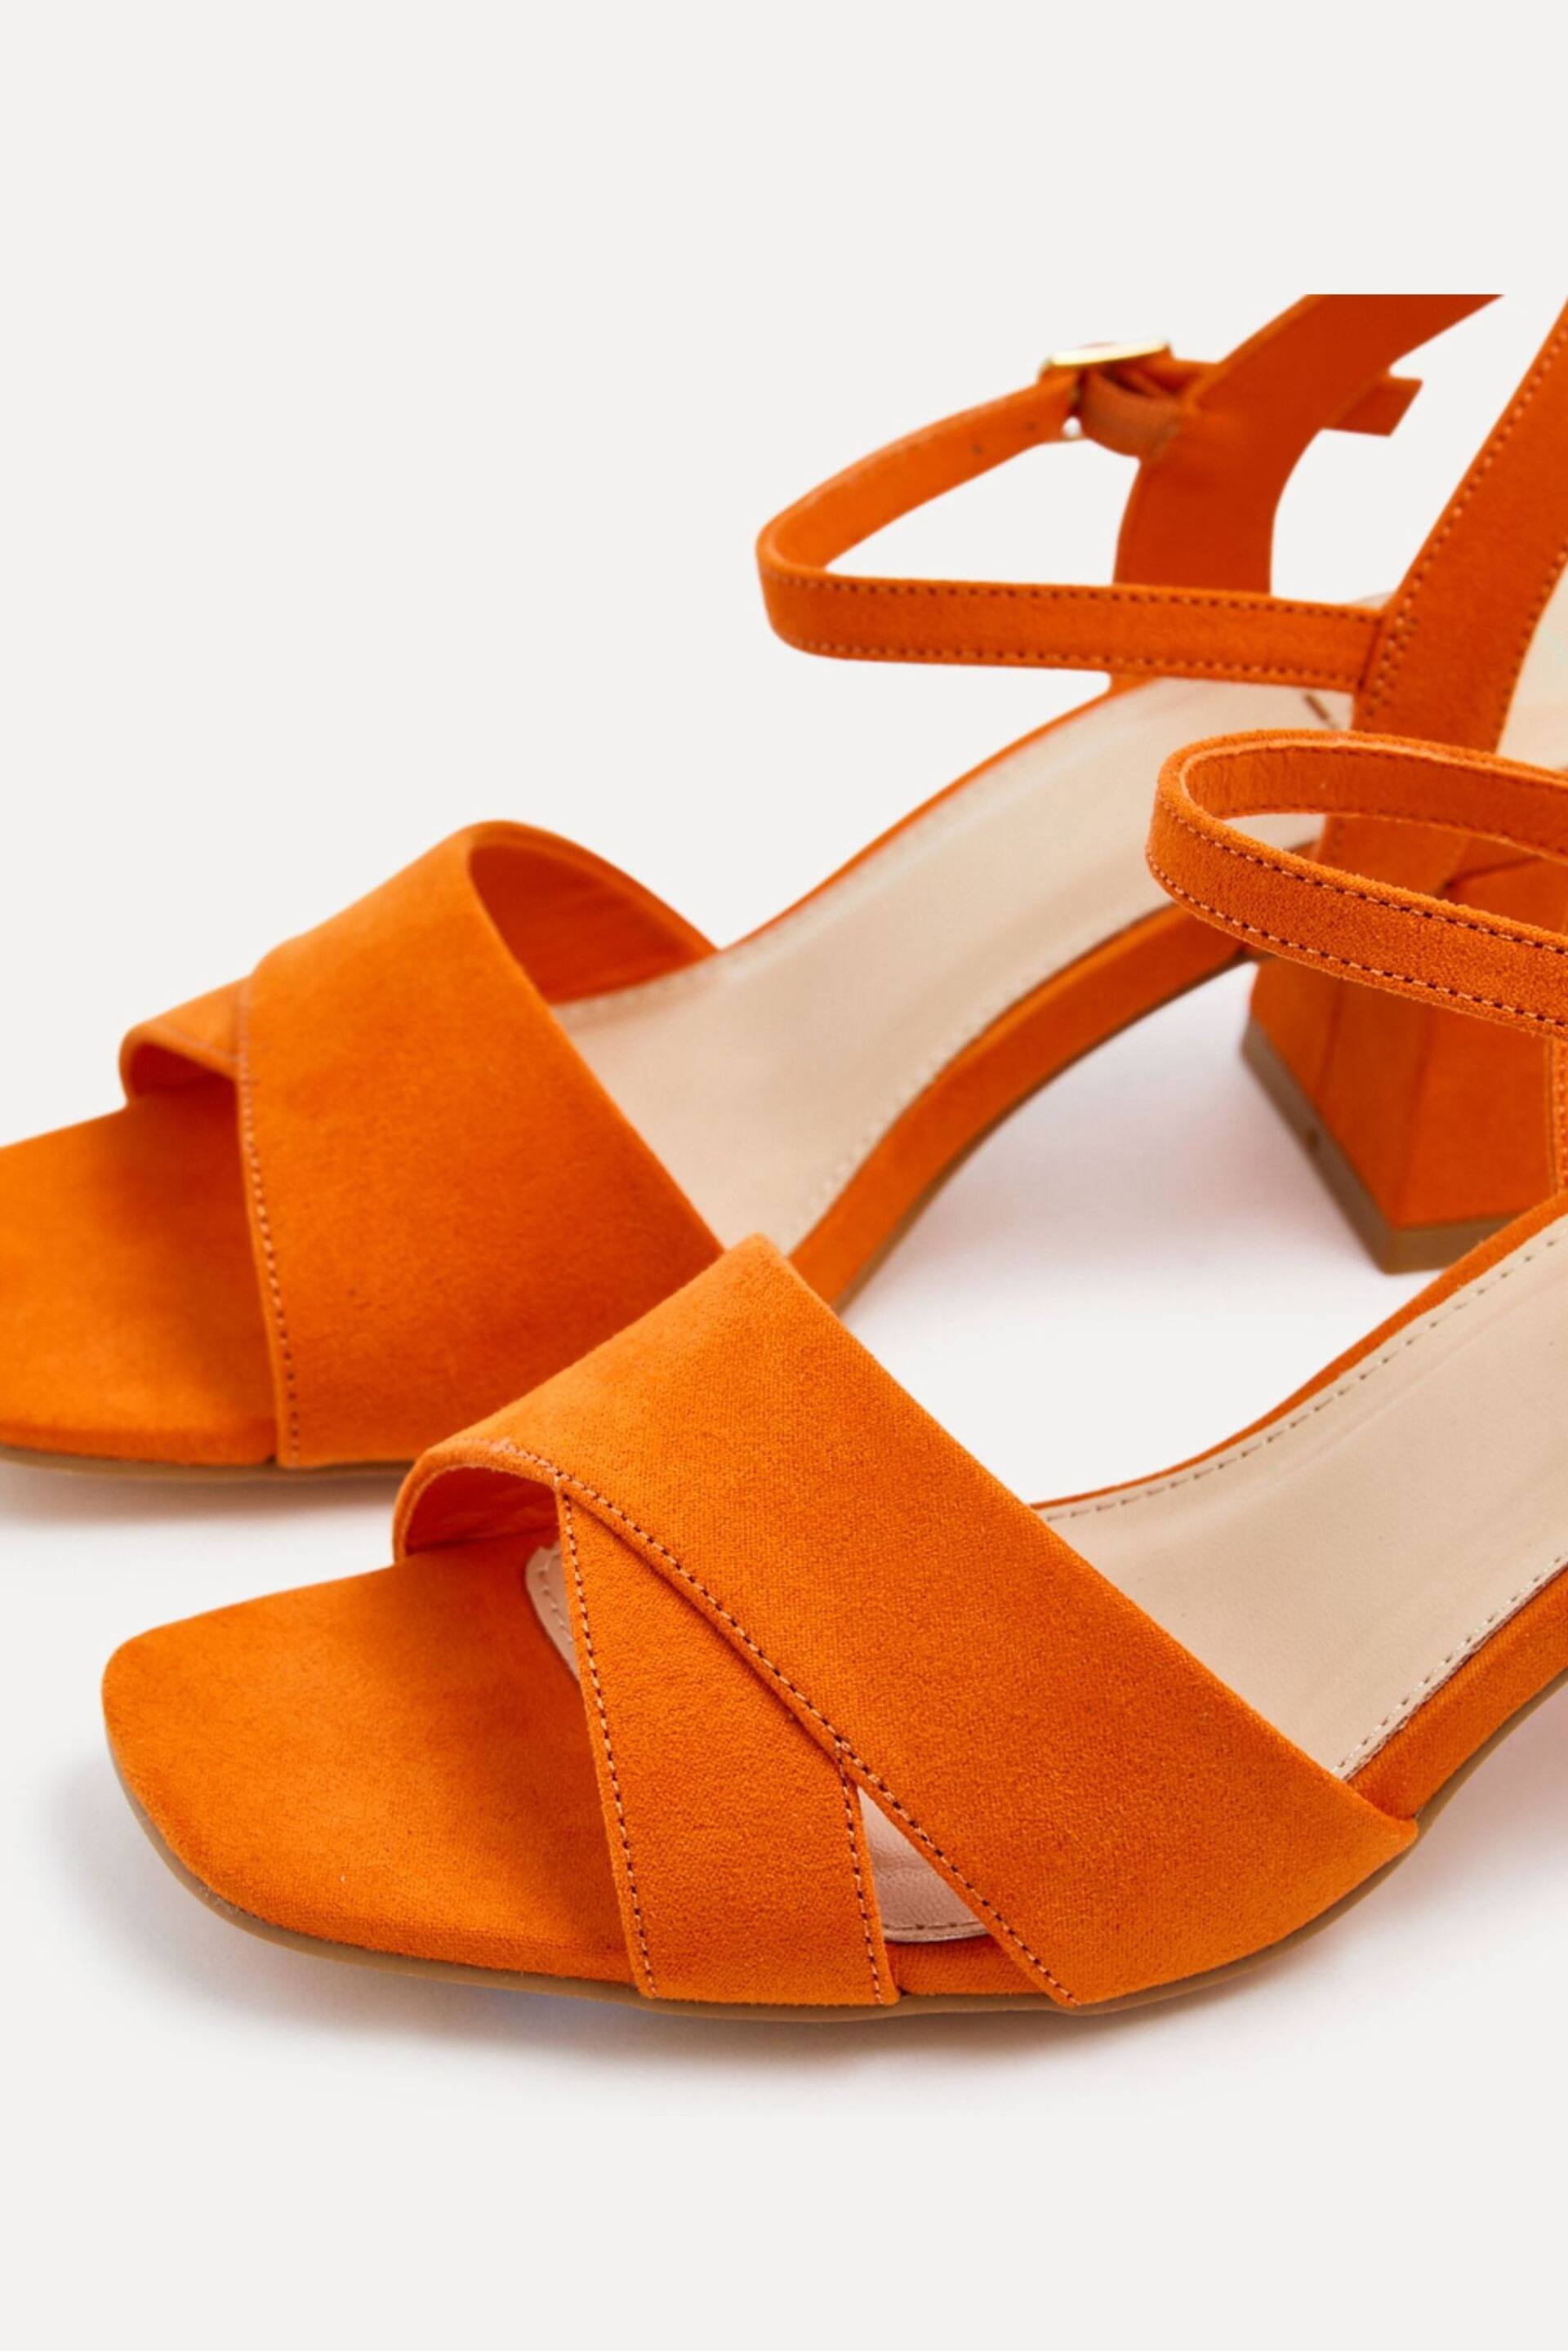 Linzi Orange Vivian Wide Fit Heeled Sandals With Crossover Front Strap - Image 4 of 5